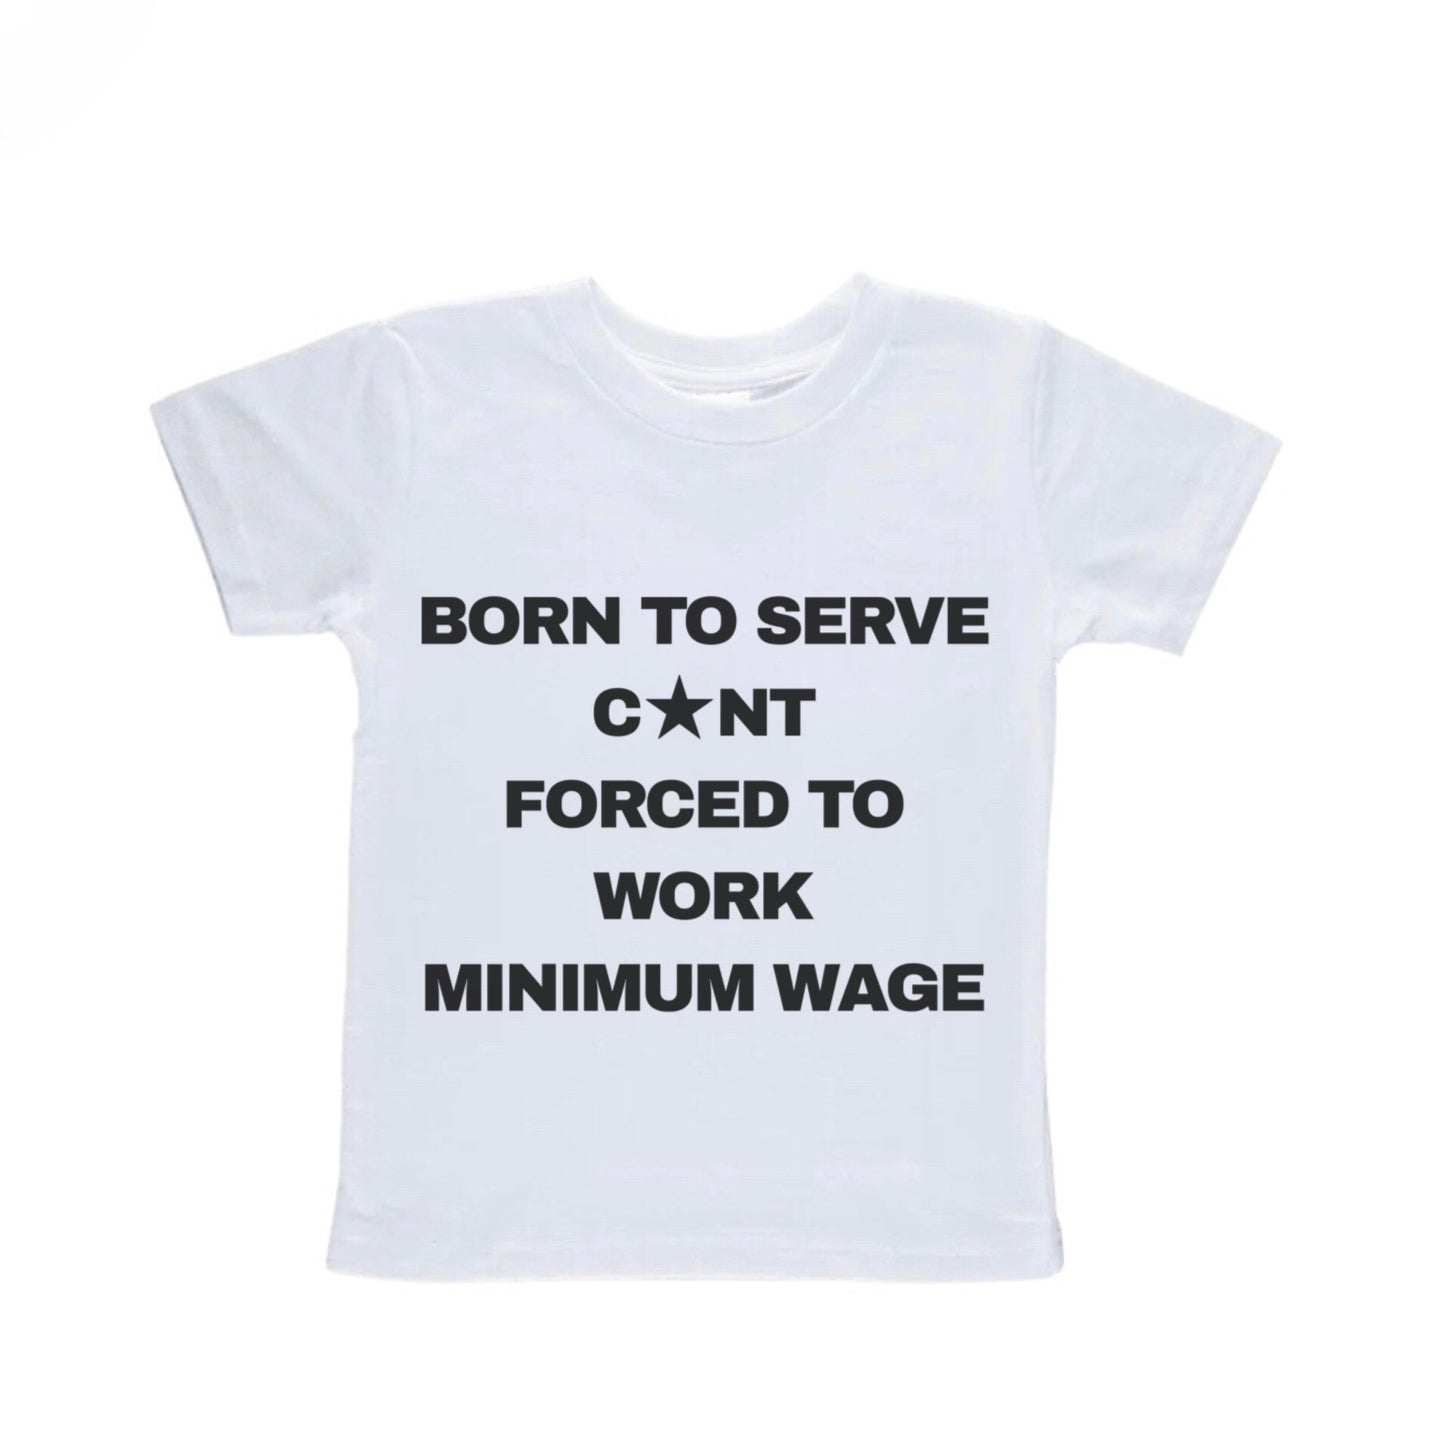 Born To Serve Cunt Forced To Work Minimum Wage Baby Tee